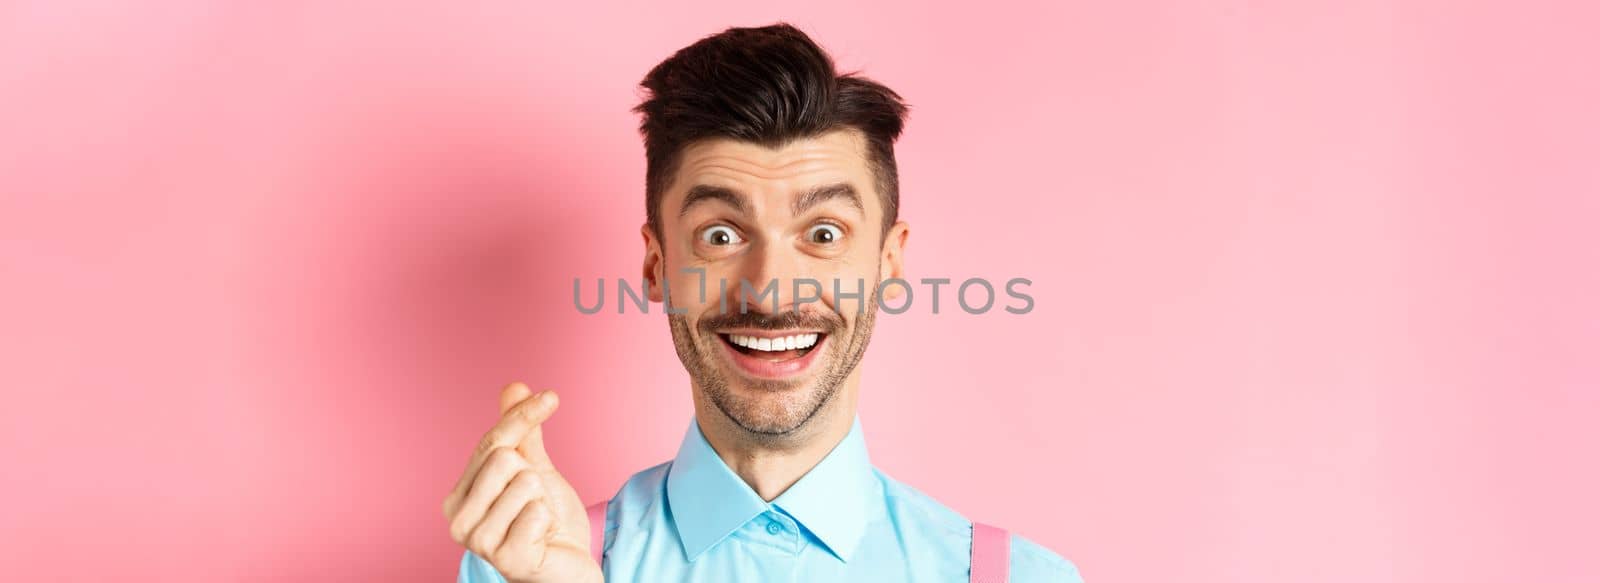 Valentines day concept. Smiling man showing finger heart and looking happy, standing over pink background.